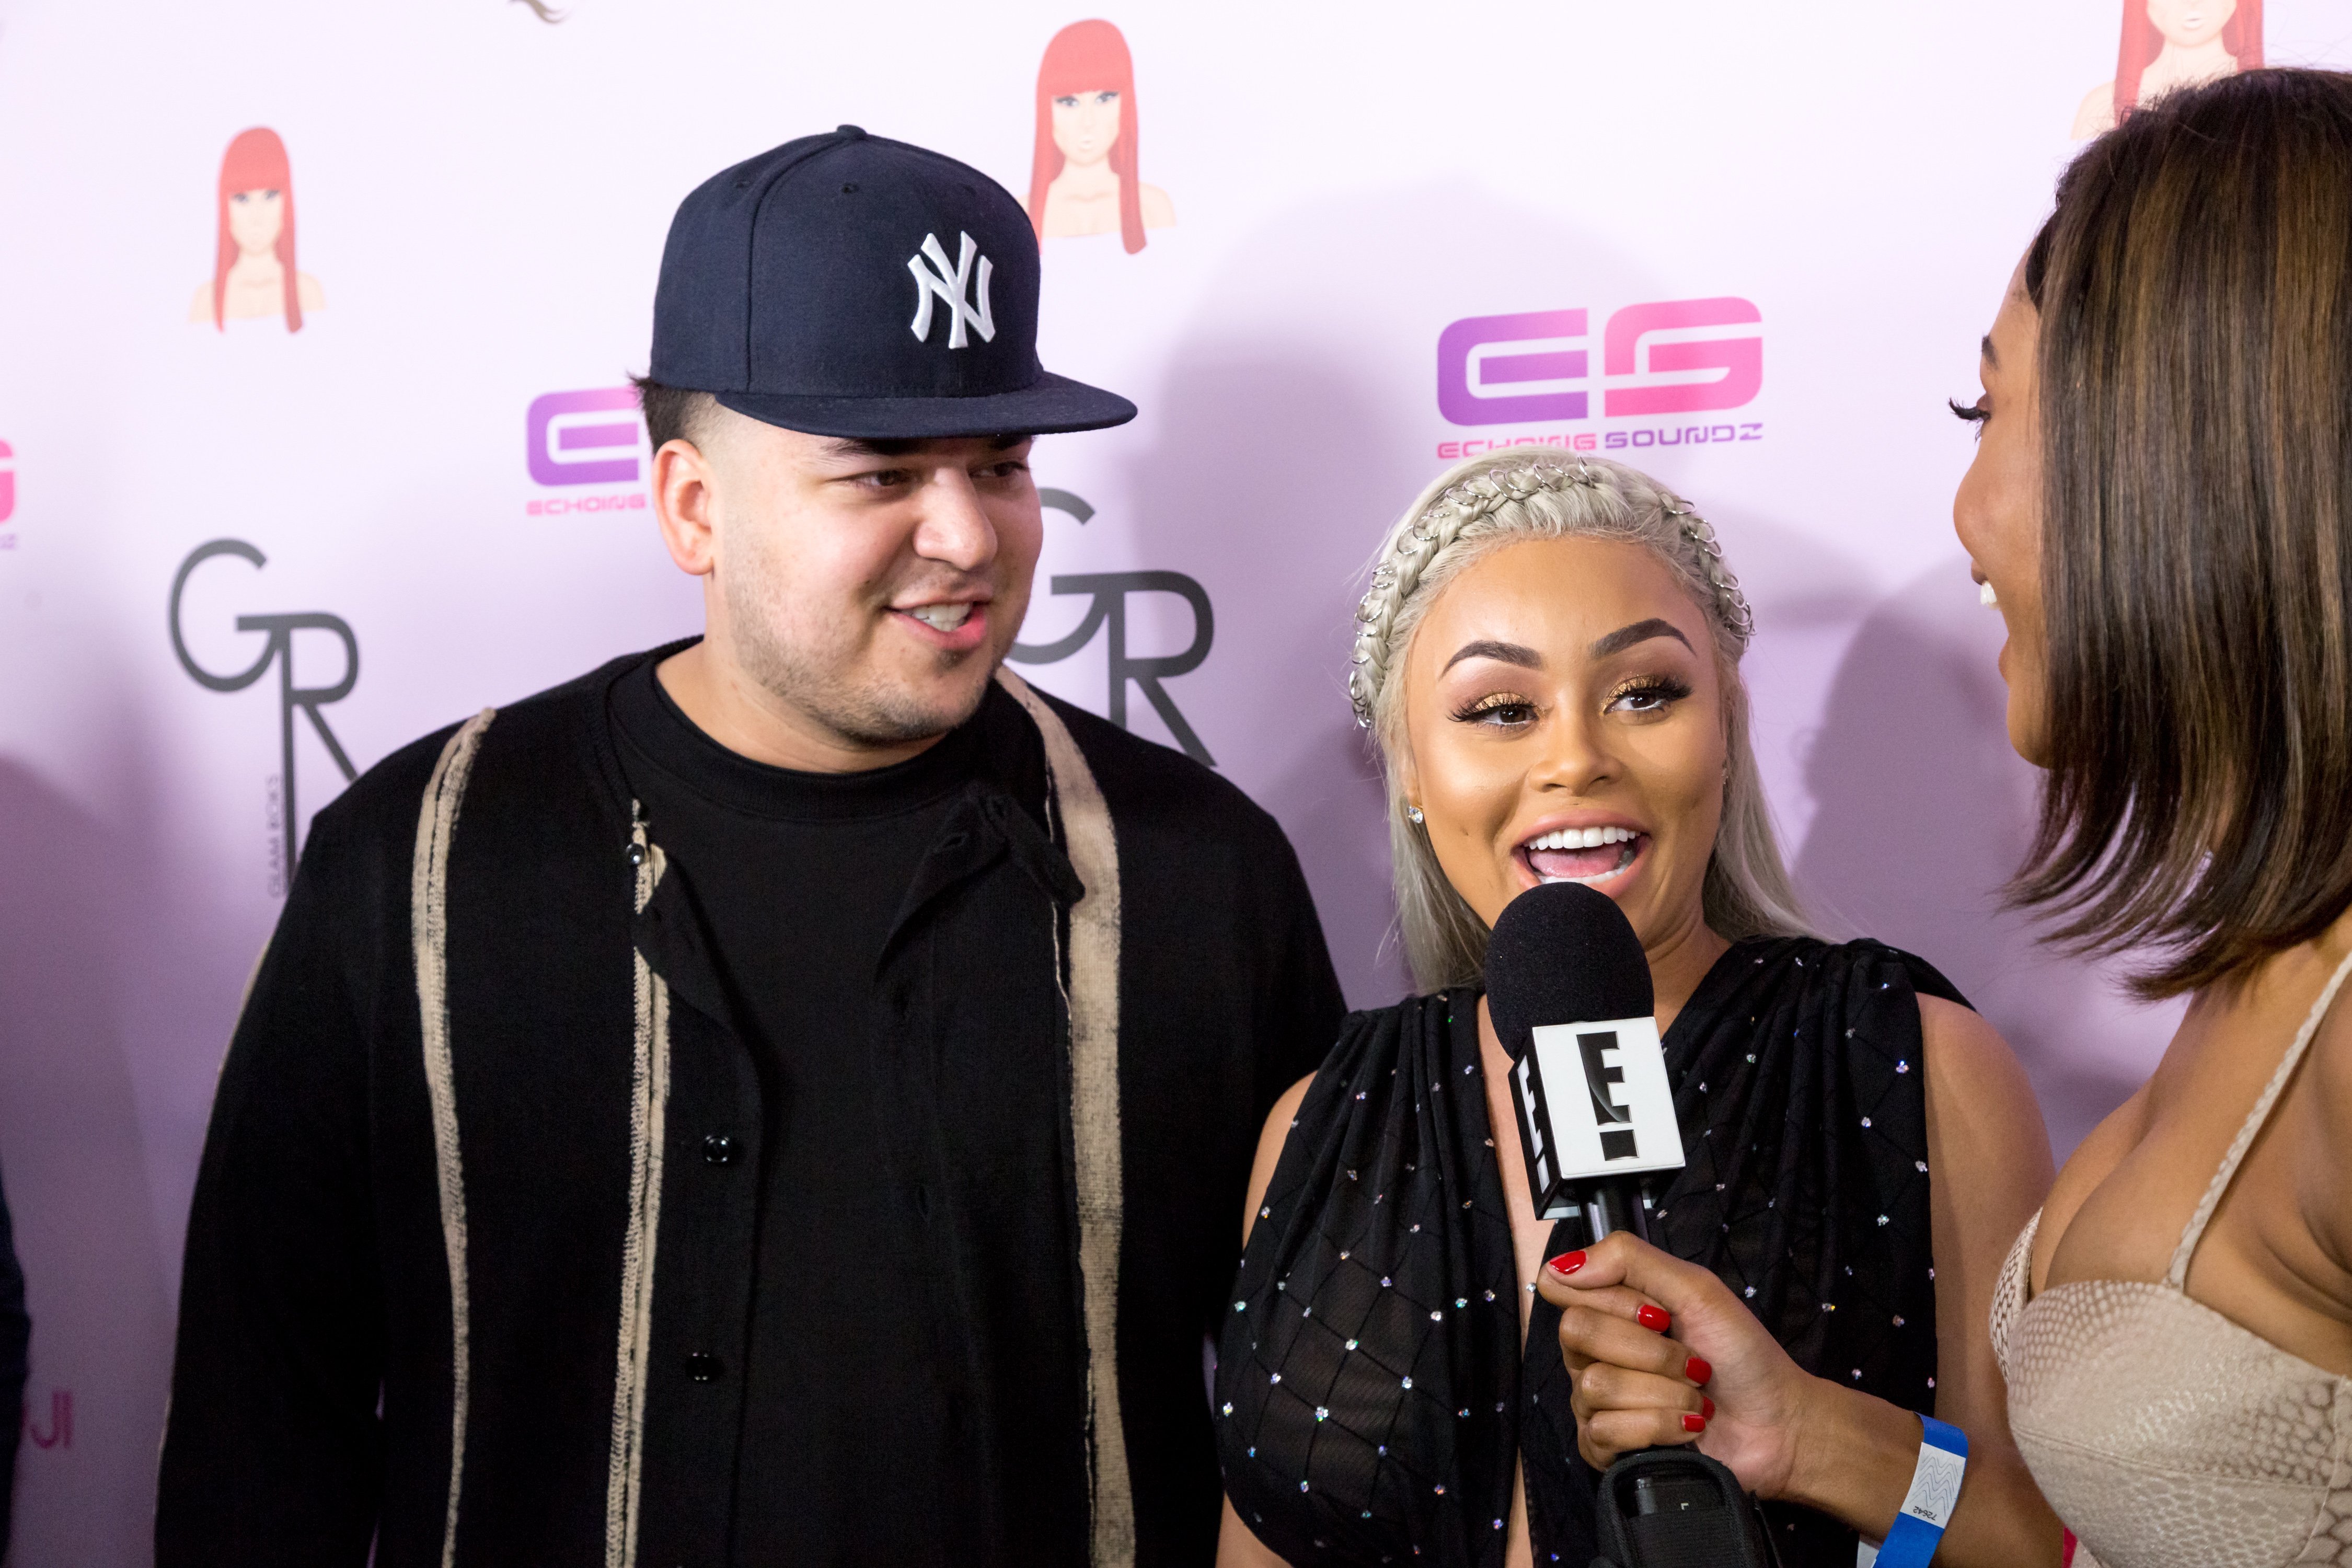 (Happier Times): Rob Kardashian & Blac Chyna at her Blac Chyna Birthday Celebration And Unveiling Of Her "Chymoji" Emoji Collection on May 10, 2016 in California | Photo: Getty Images